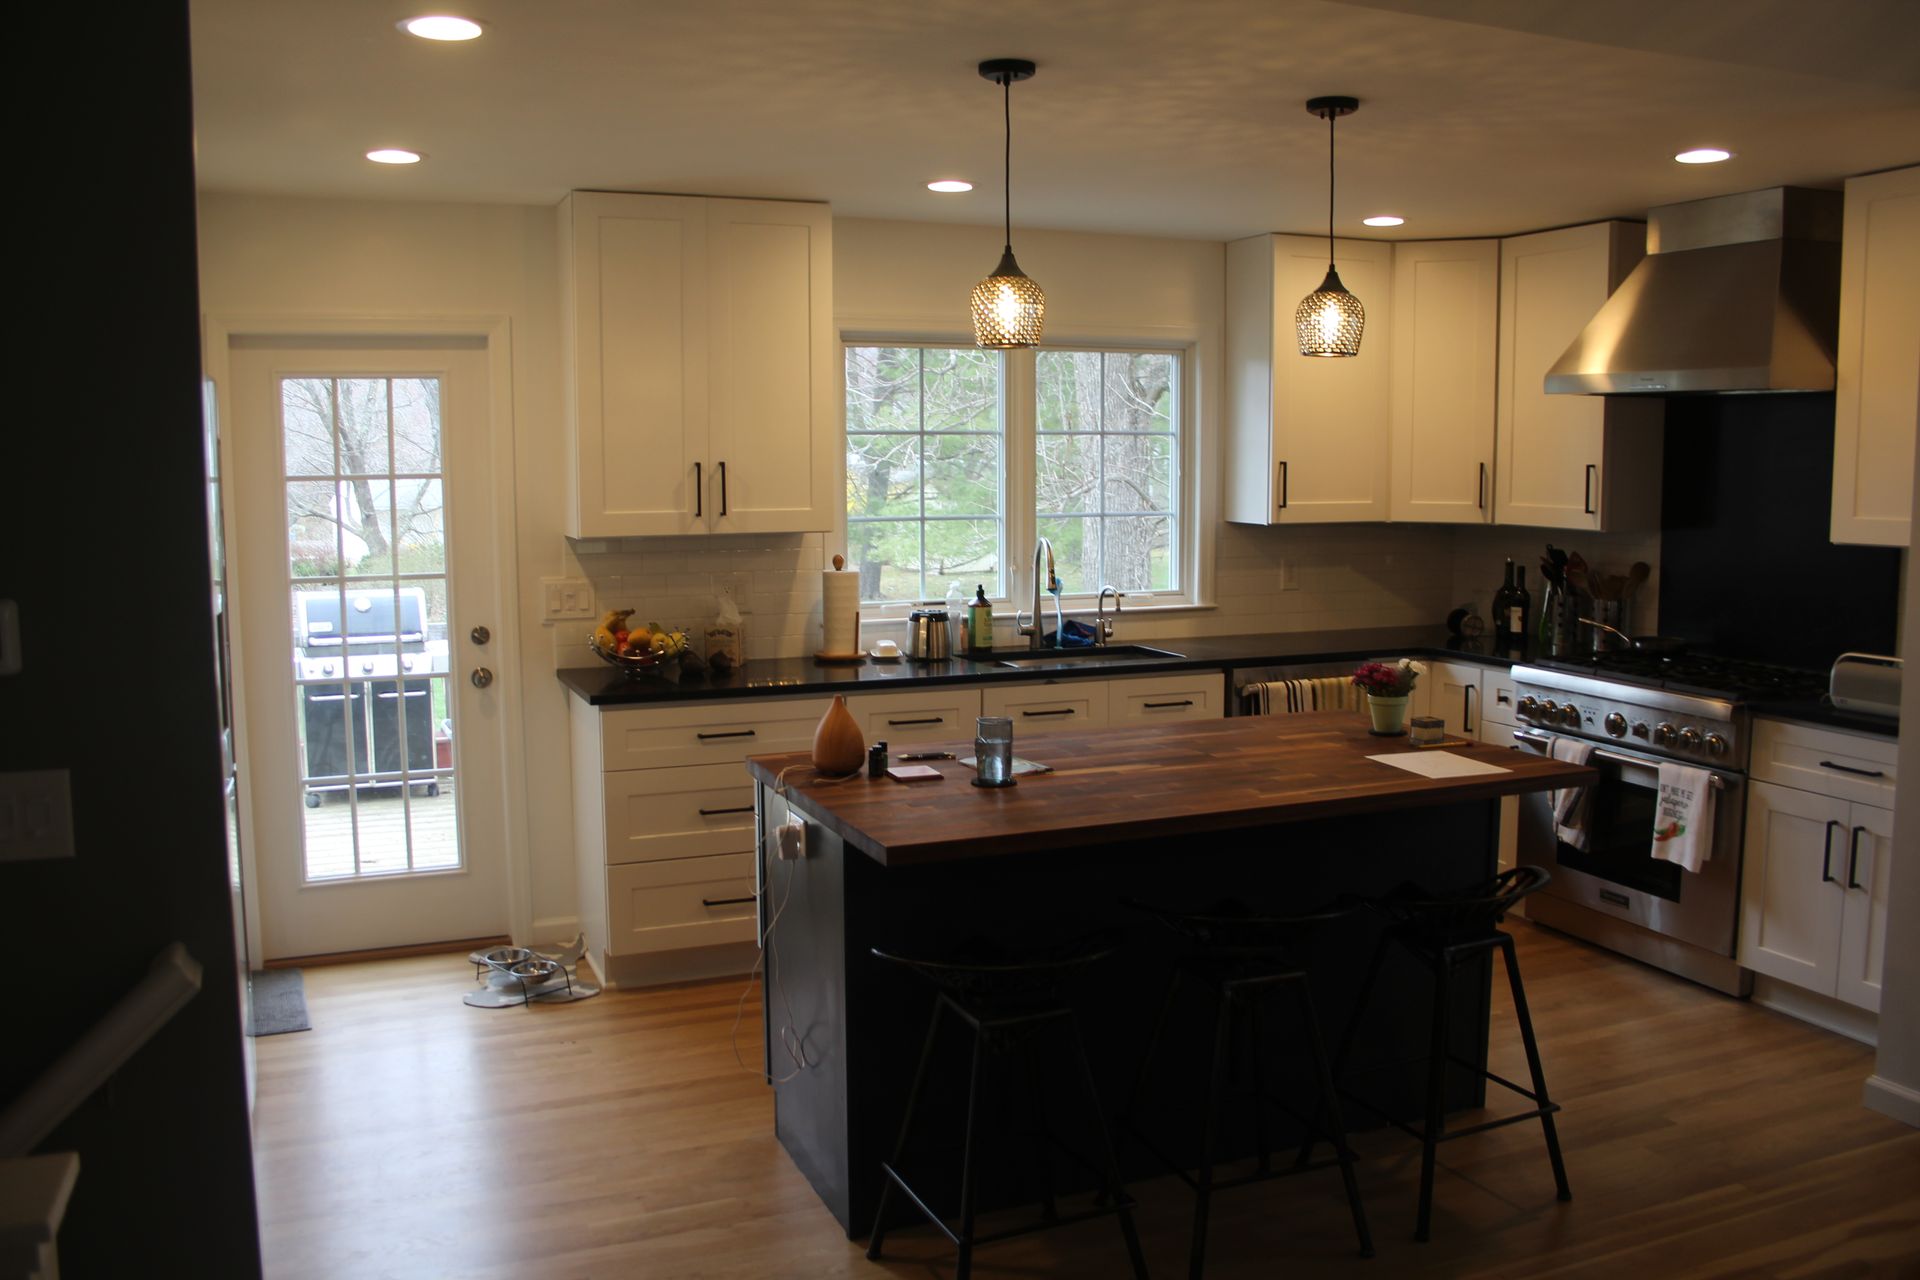 A kitchen with white cabinets and stainless steel appliances